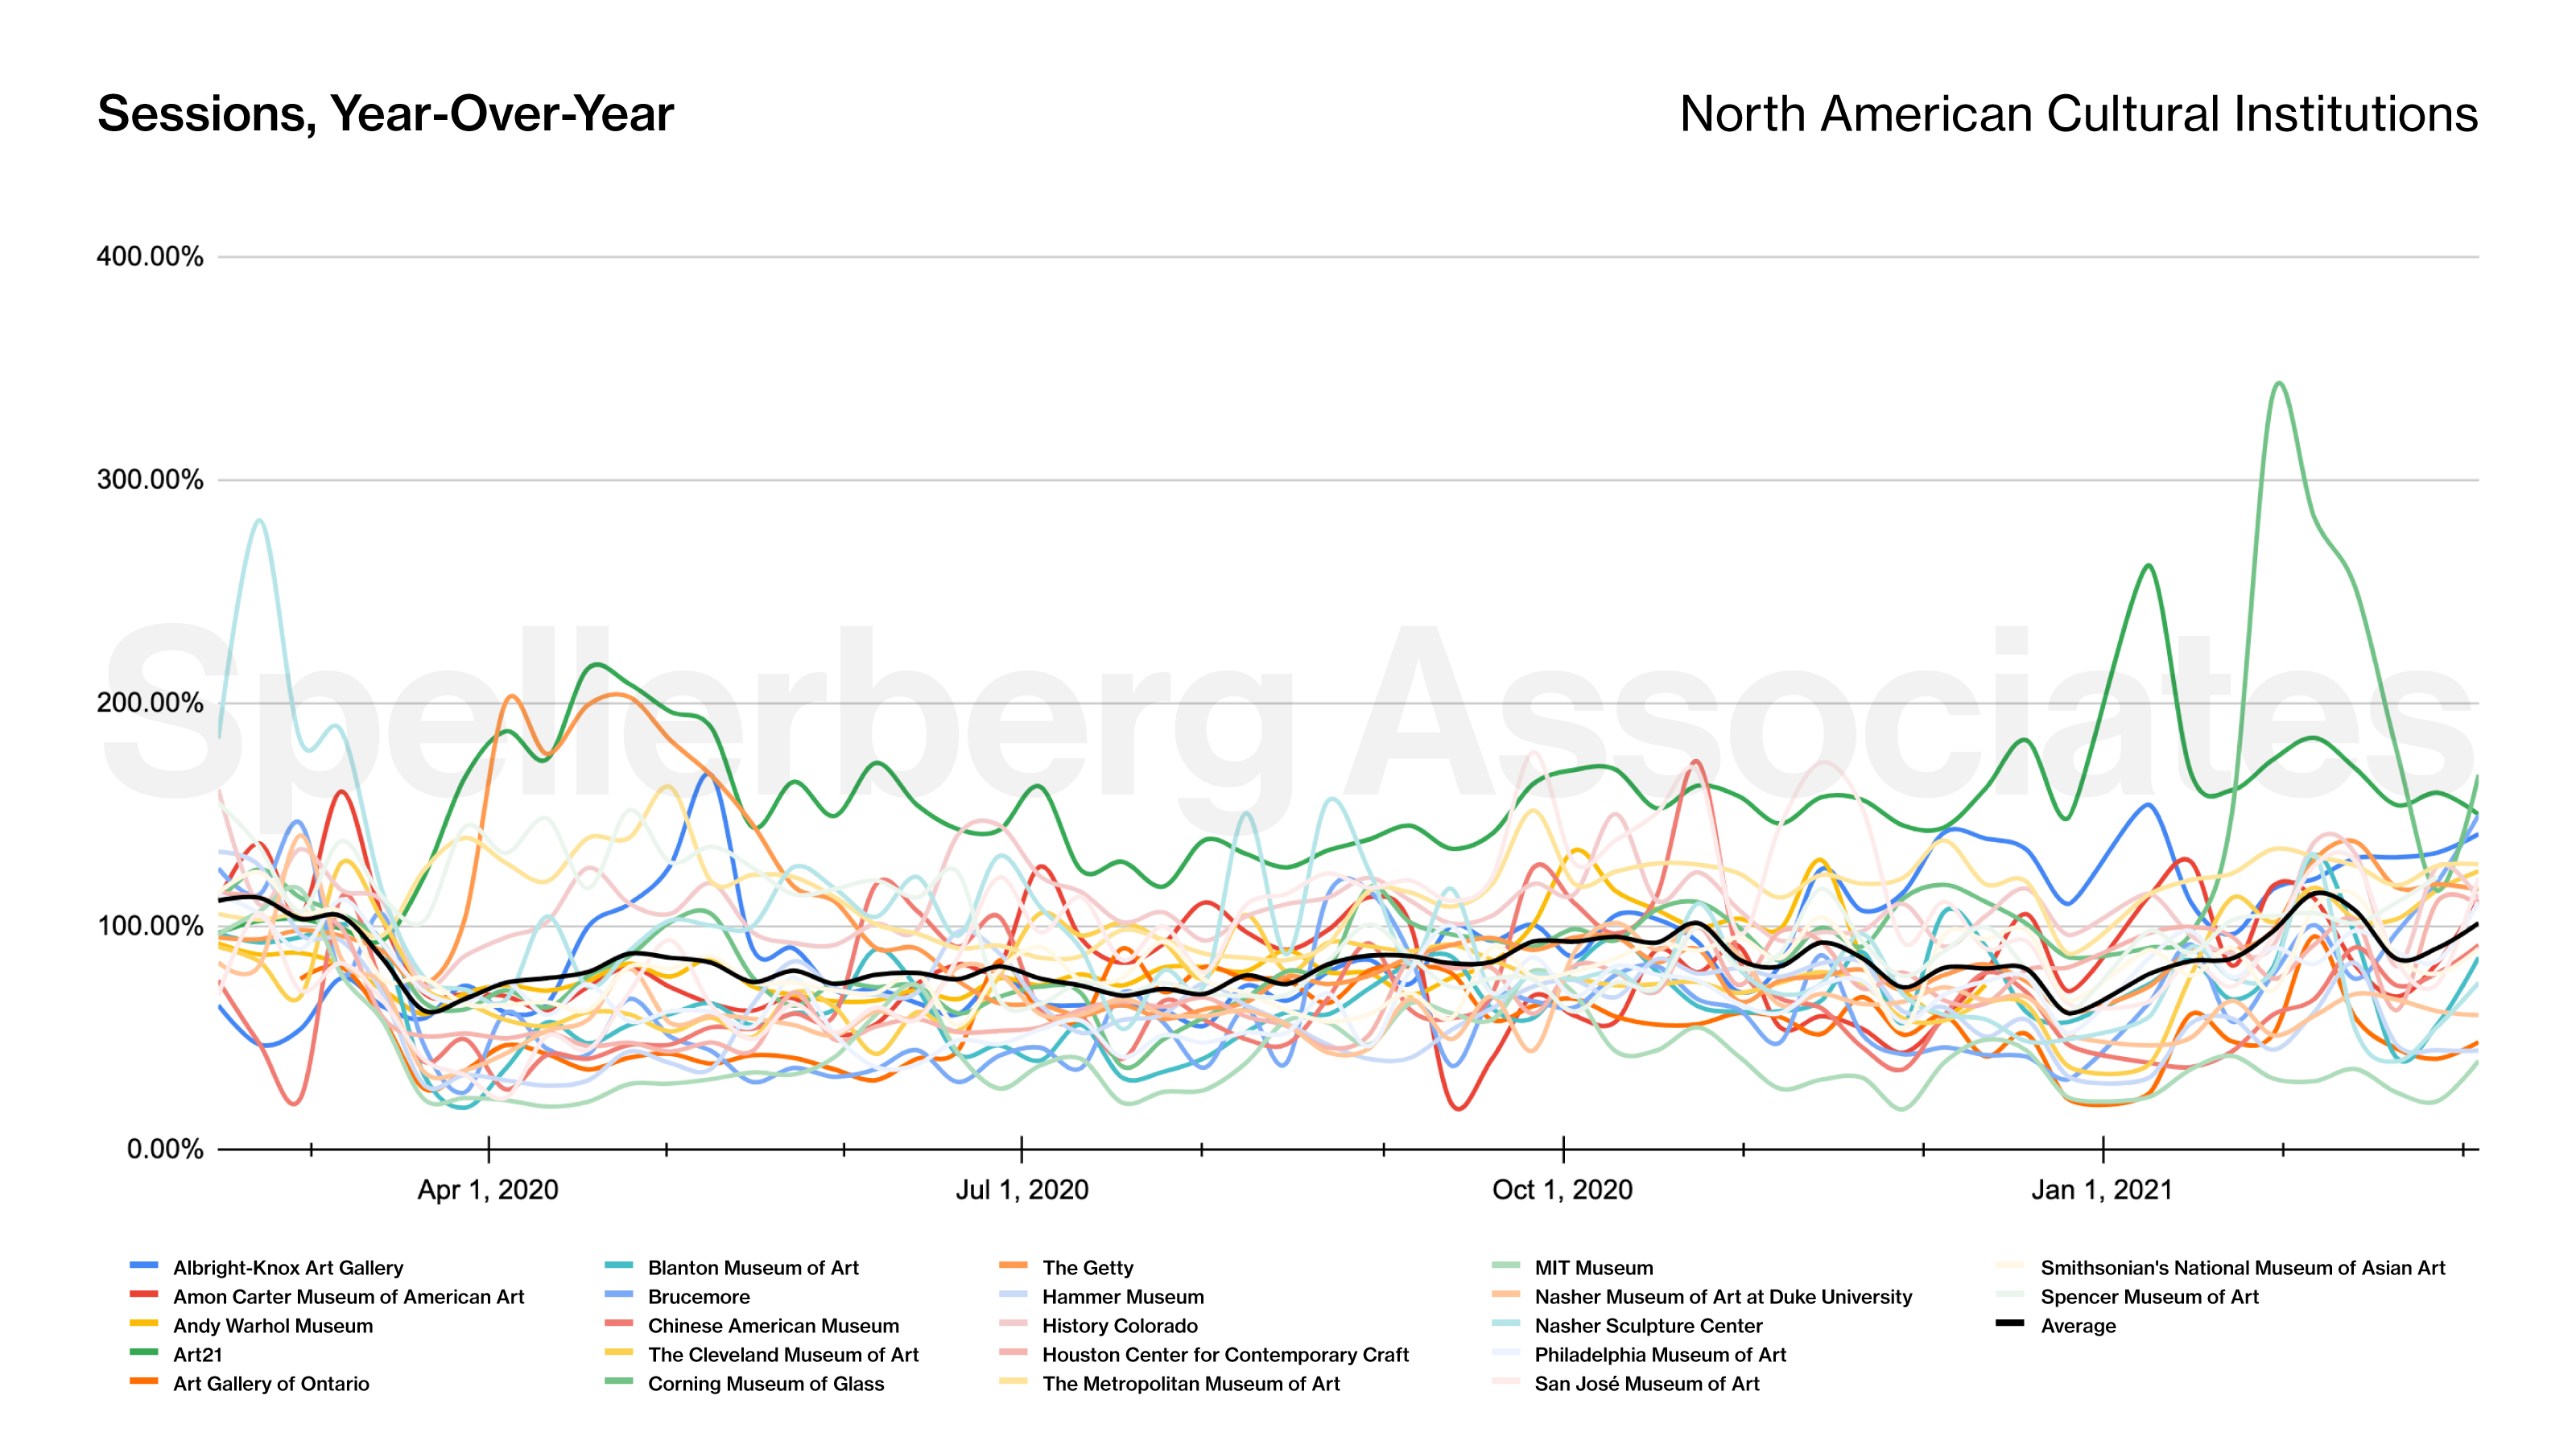 Chart showing web traffic data for 22 North American cultural institutions